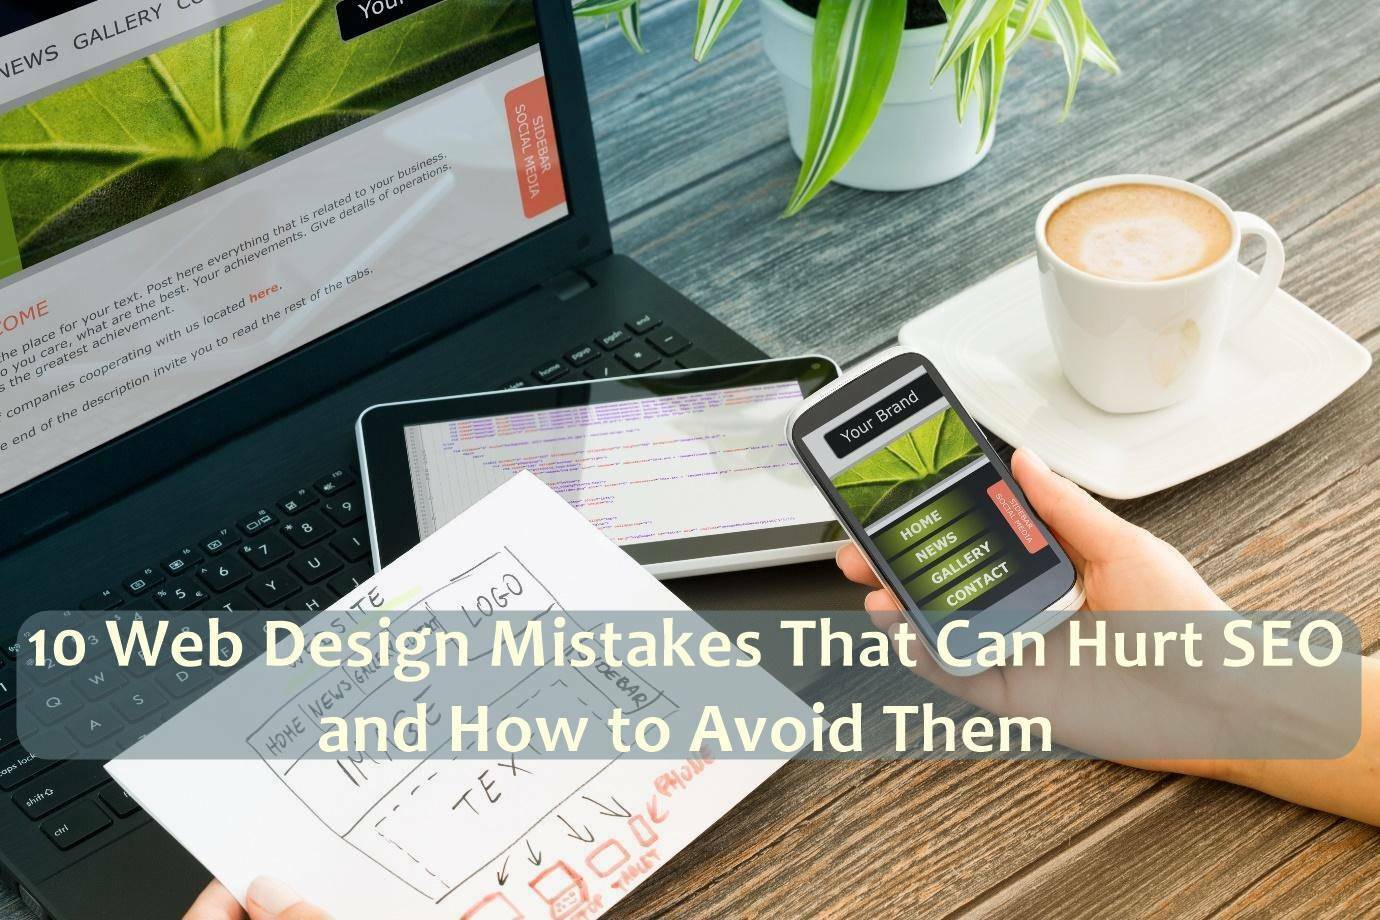 10 Web Design Mistakes That Can Hurt SEO and How to Avoid Them